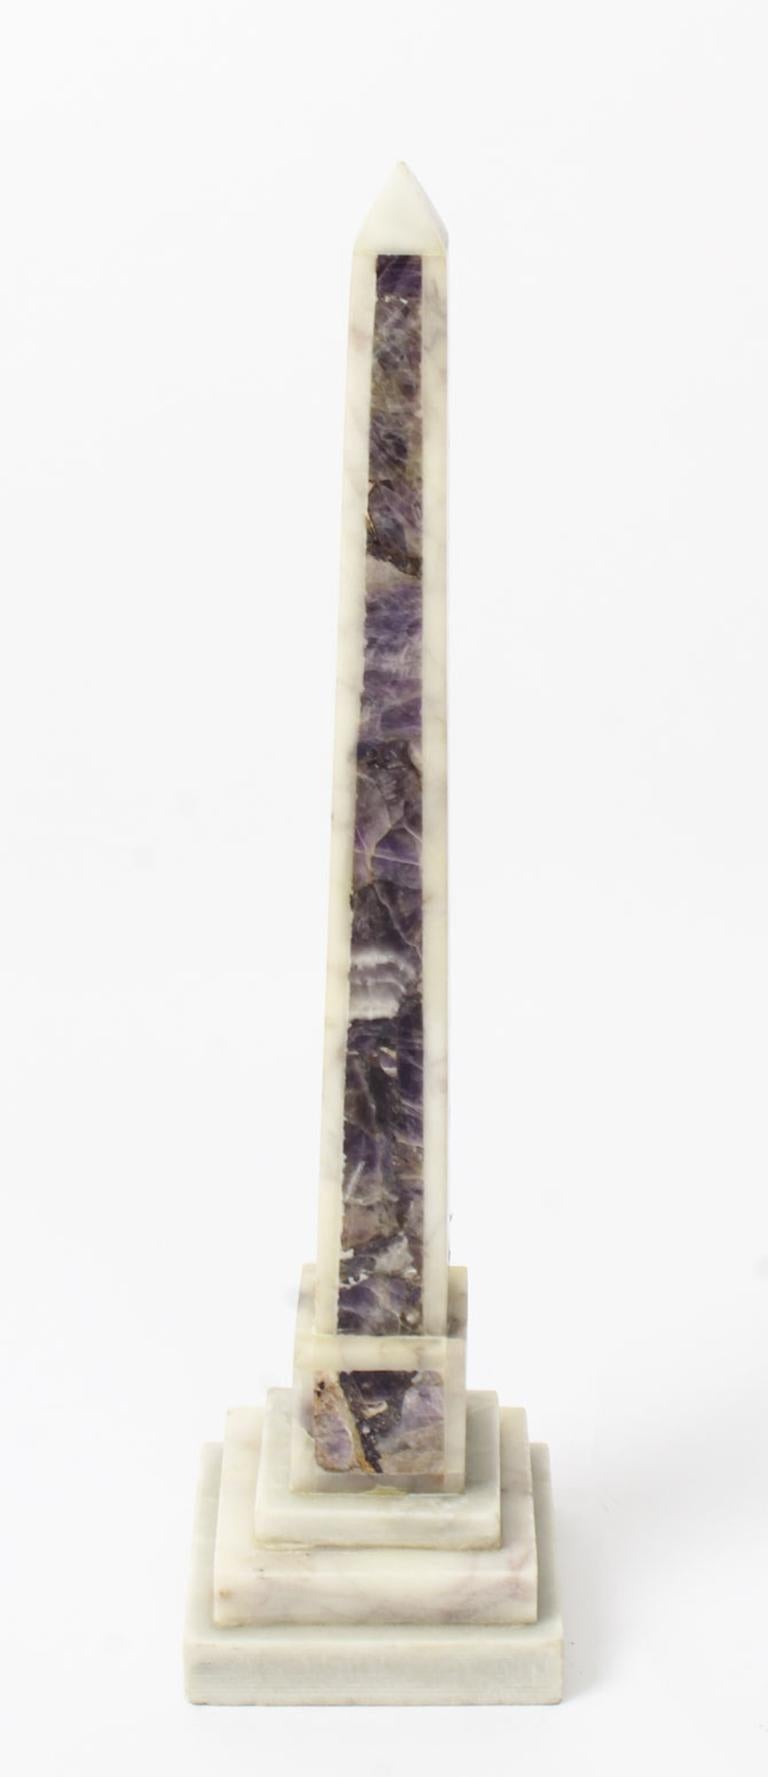 A stunning antique pair of Carrara and amethyst marble 'Grand Tour' obelisks dating from the late 19th century.

The pair are carved from the finest Carrara marble with amethyst panels on tapering bodies raised on square stepped marble